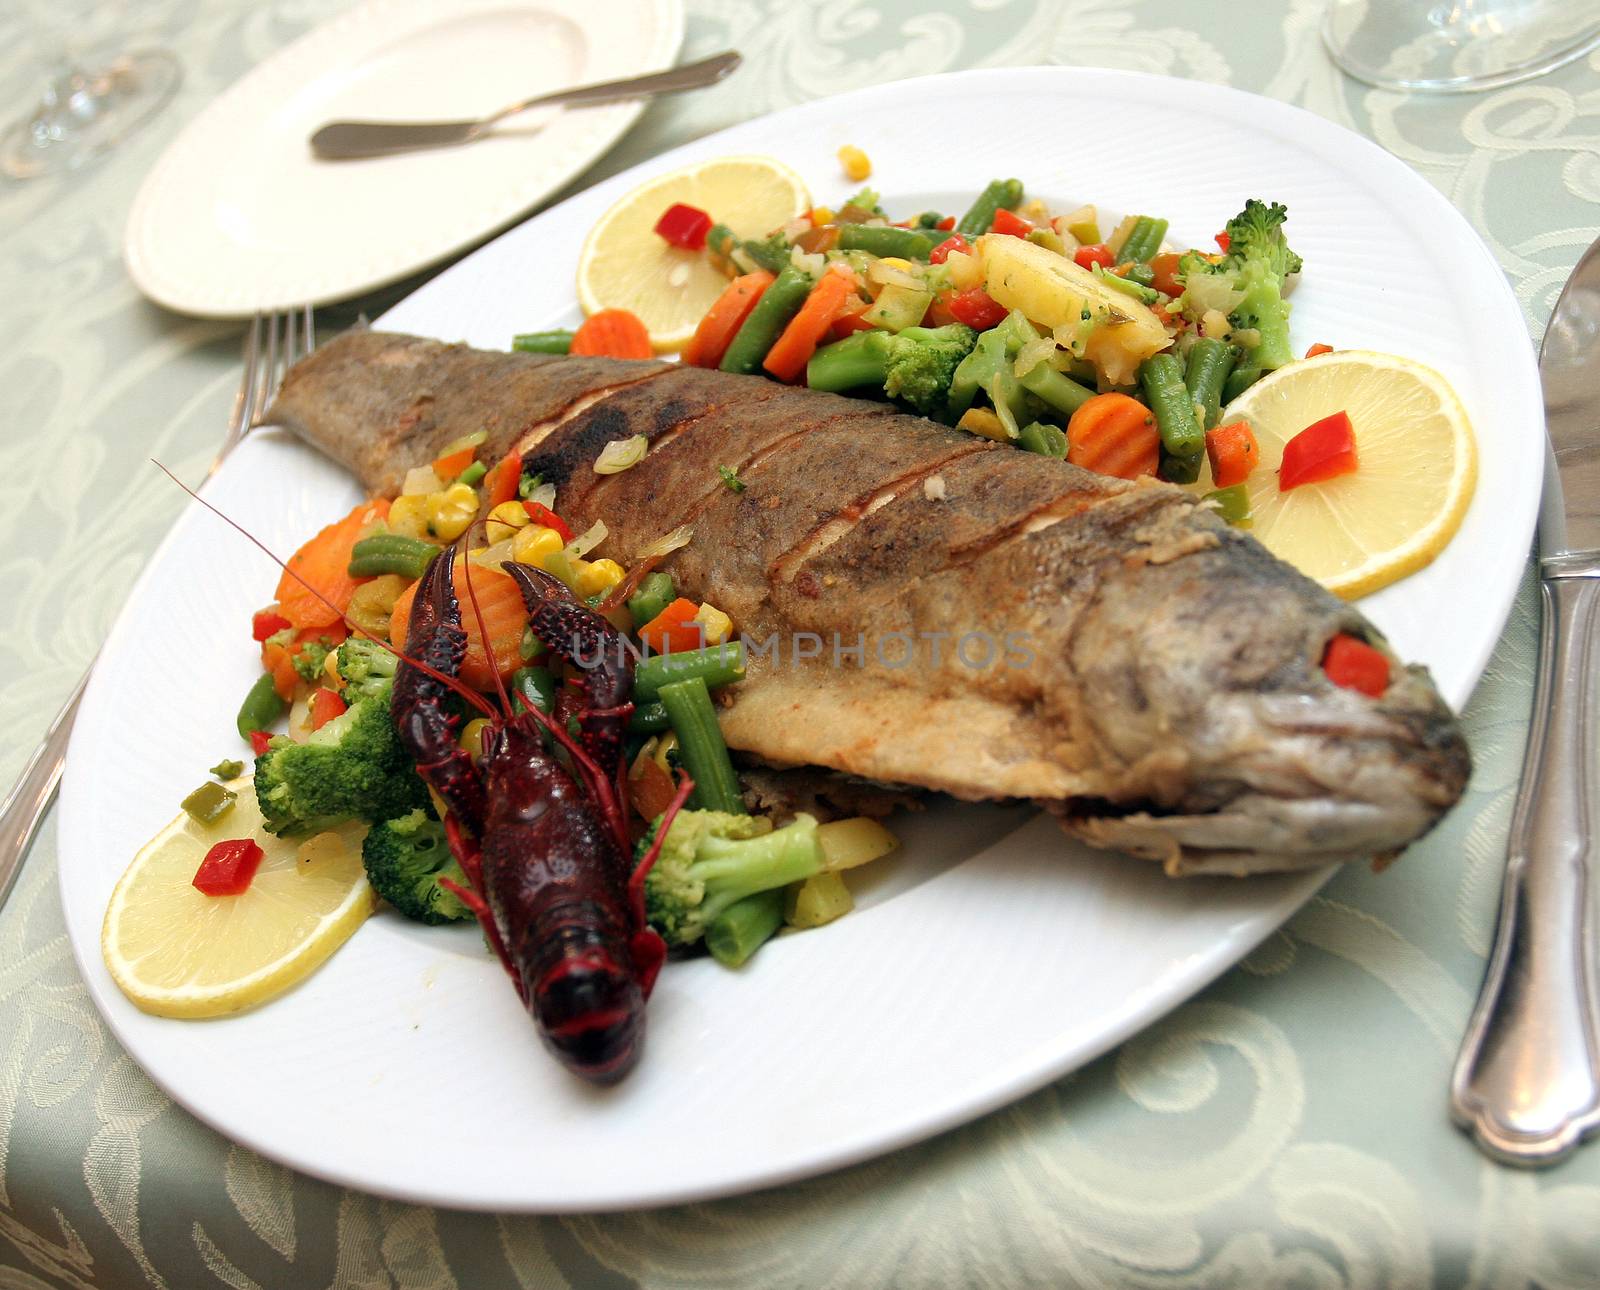 Fried trout with vegetables. by robert_przybysz